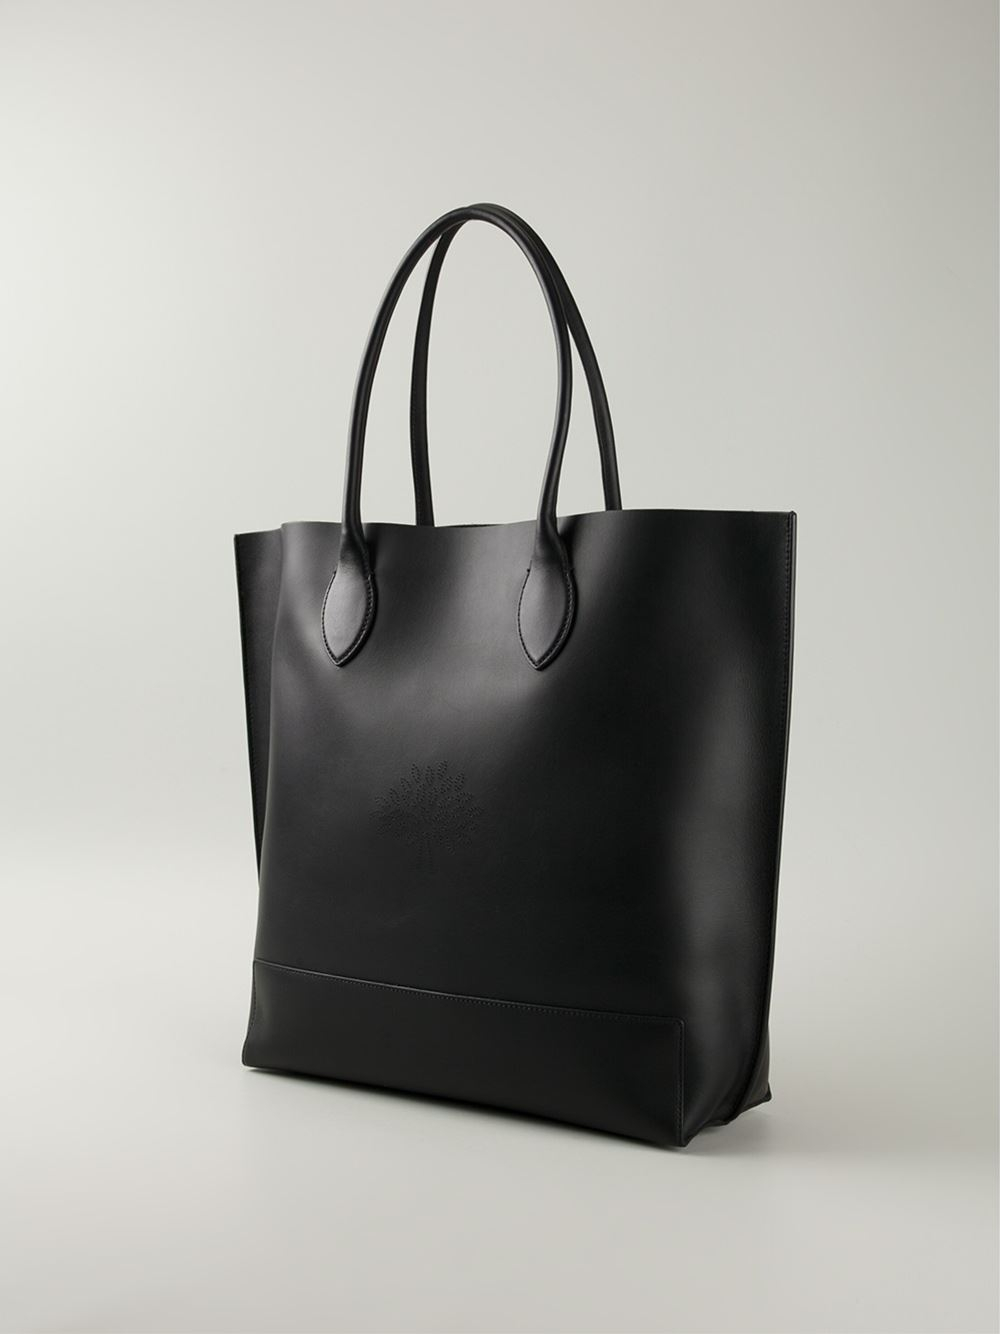 Mulberry 'Blossom' Shopper Tote in Black - Lyst